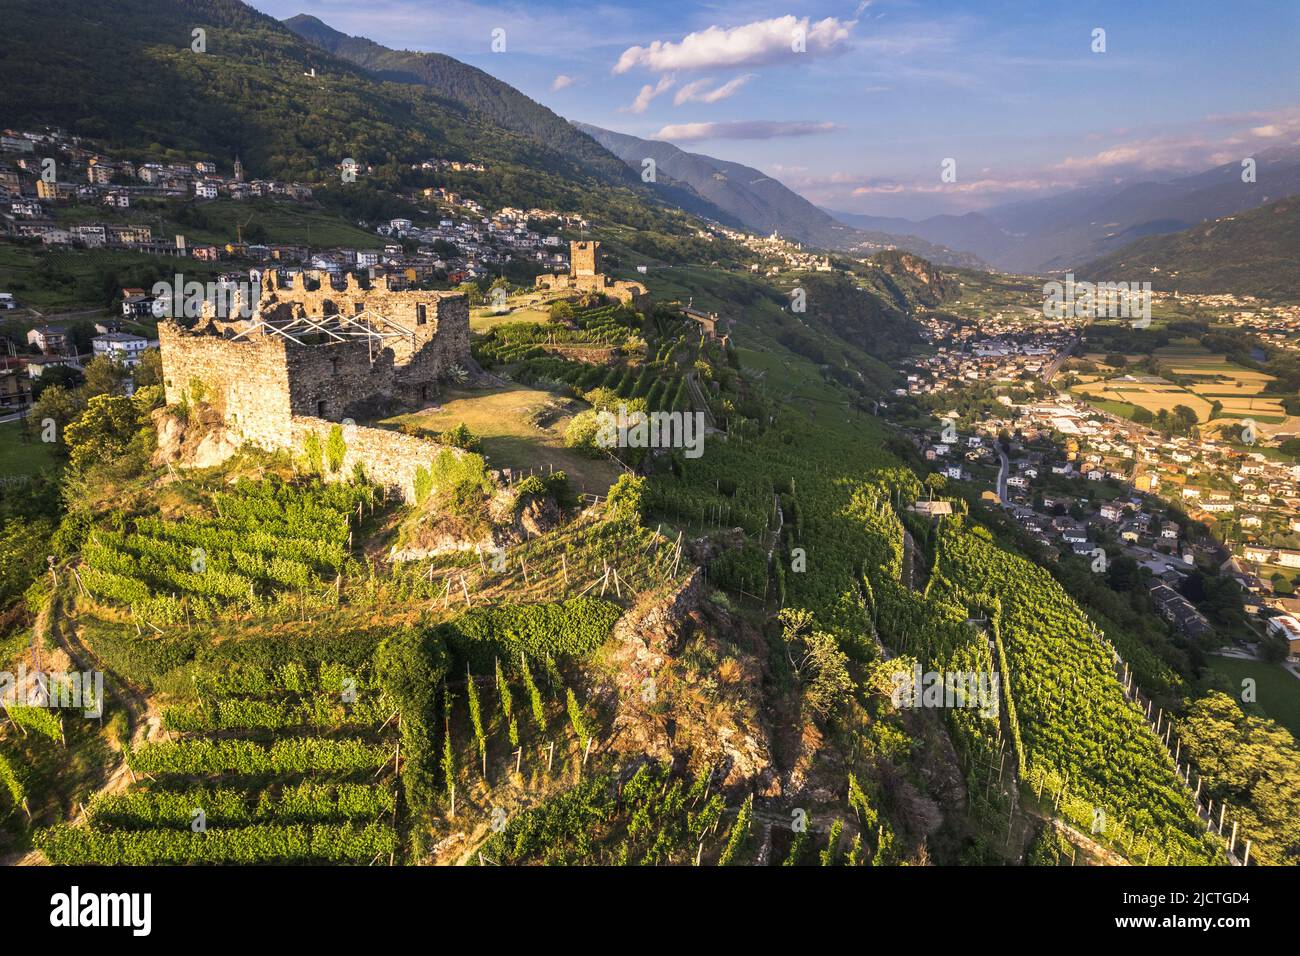 Aerial view of landscape of Valtellina with his vineyards, Grumello, Lombardy.  Stock Photo